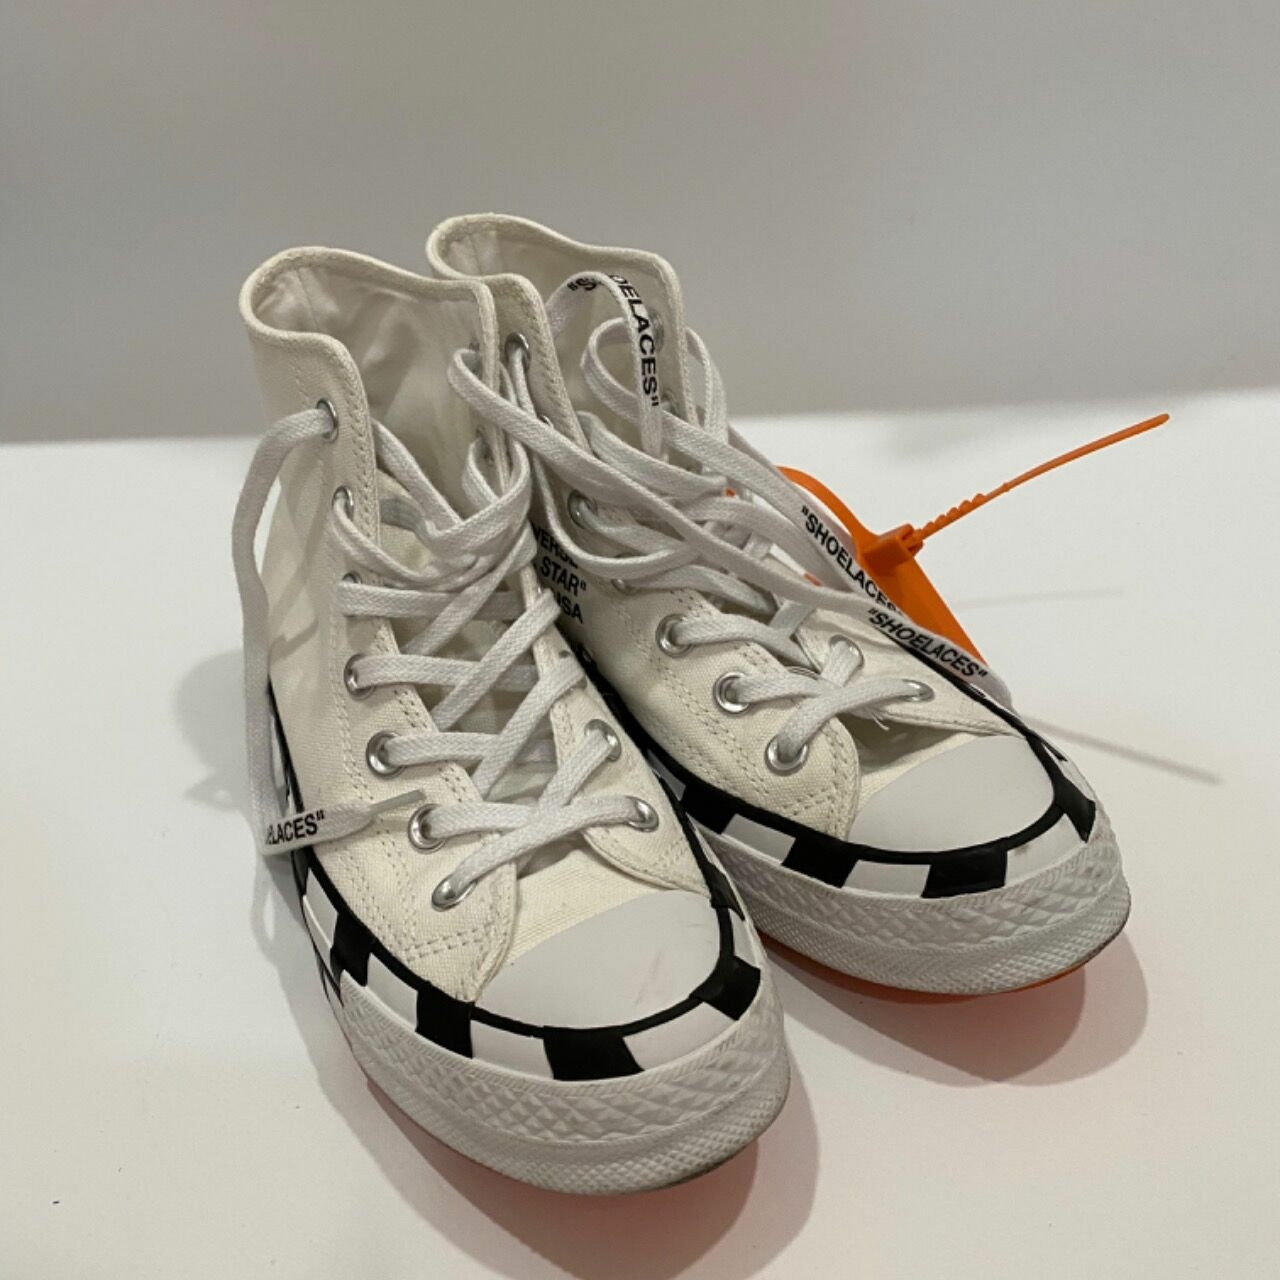 Off-White x Converse Shoes